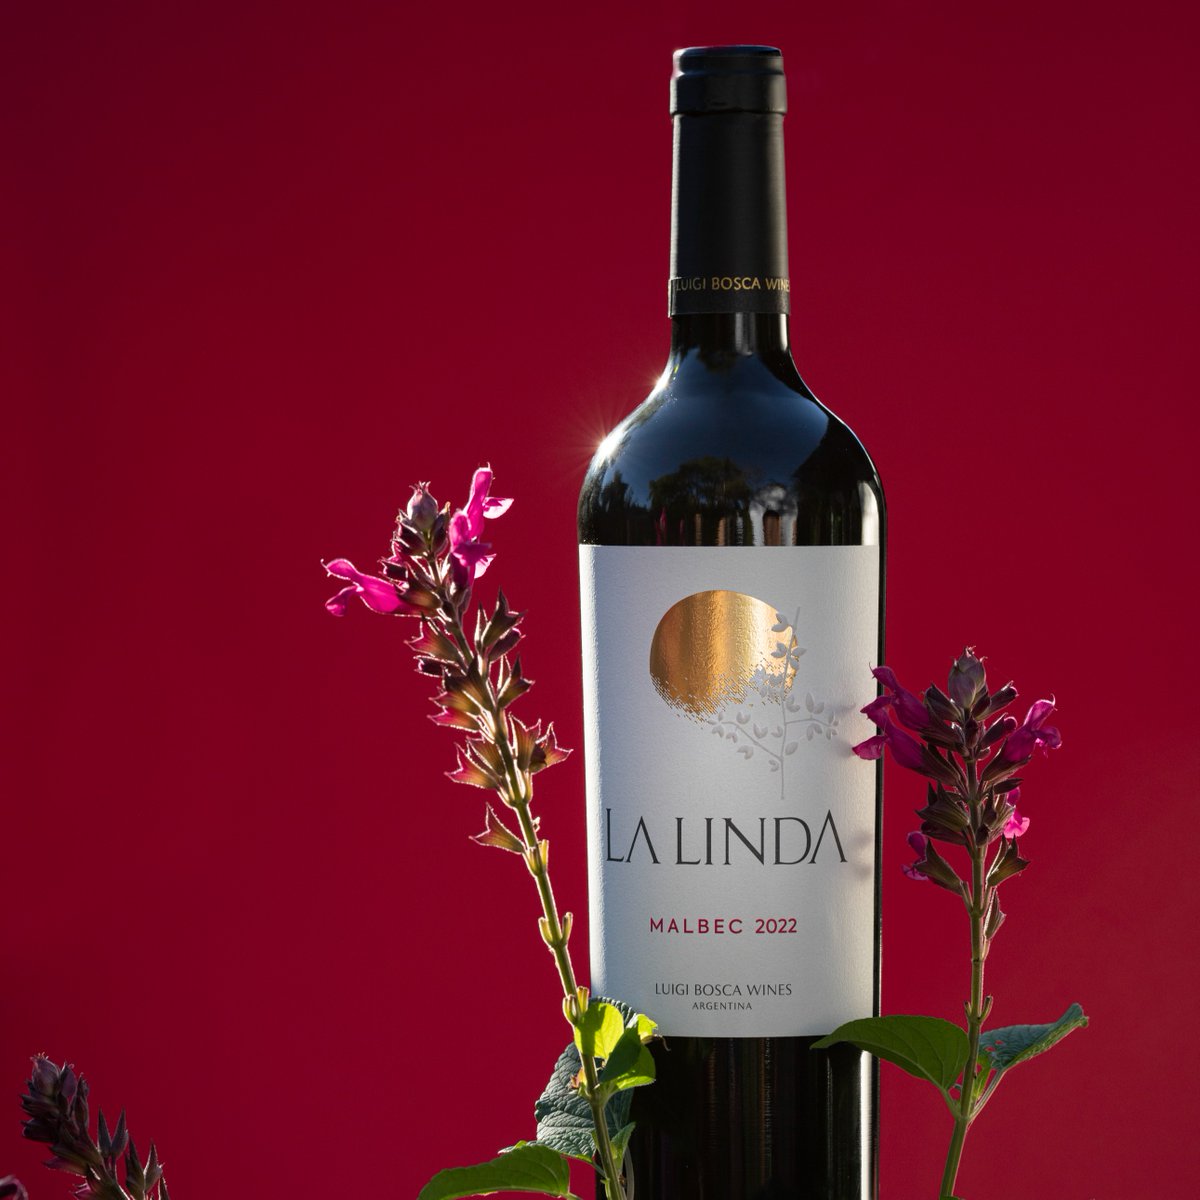 Soak up this summer weather and partner your Luigi Bosca La Linda Malbec (now $2 off/bottle) with a grilled steak! Read Harry's latest blog (bit.ly/3JAIIFC) to find out why this price-friendly wine is perfect for September. #LCBO #FWMCanada